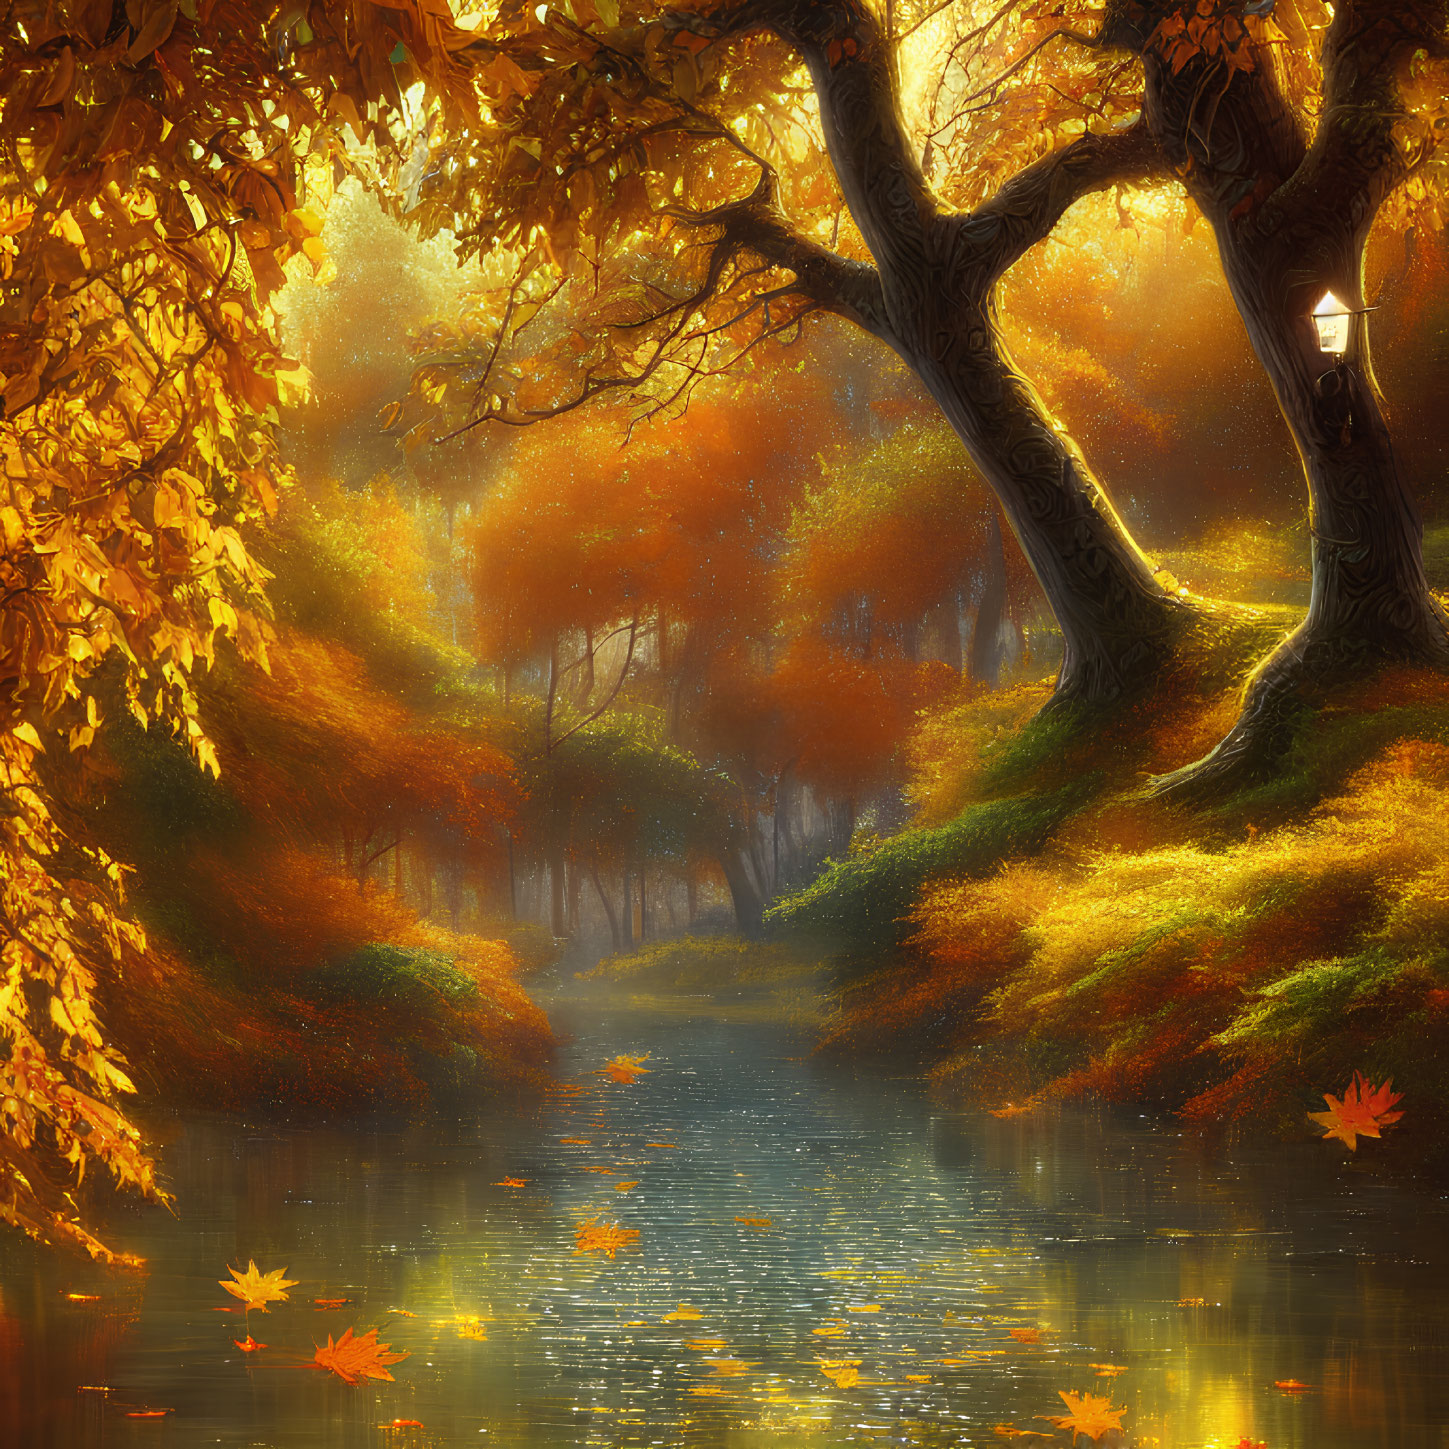 Ethereal autumn landscape with golden leaves, serene river, glowing streetlamps, majestic trees